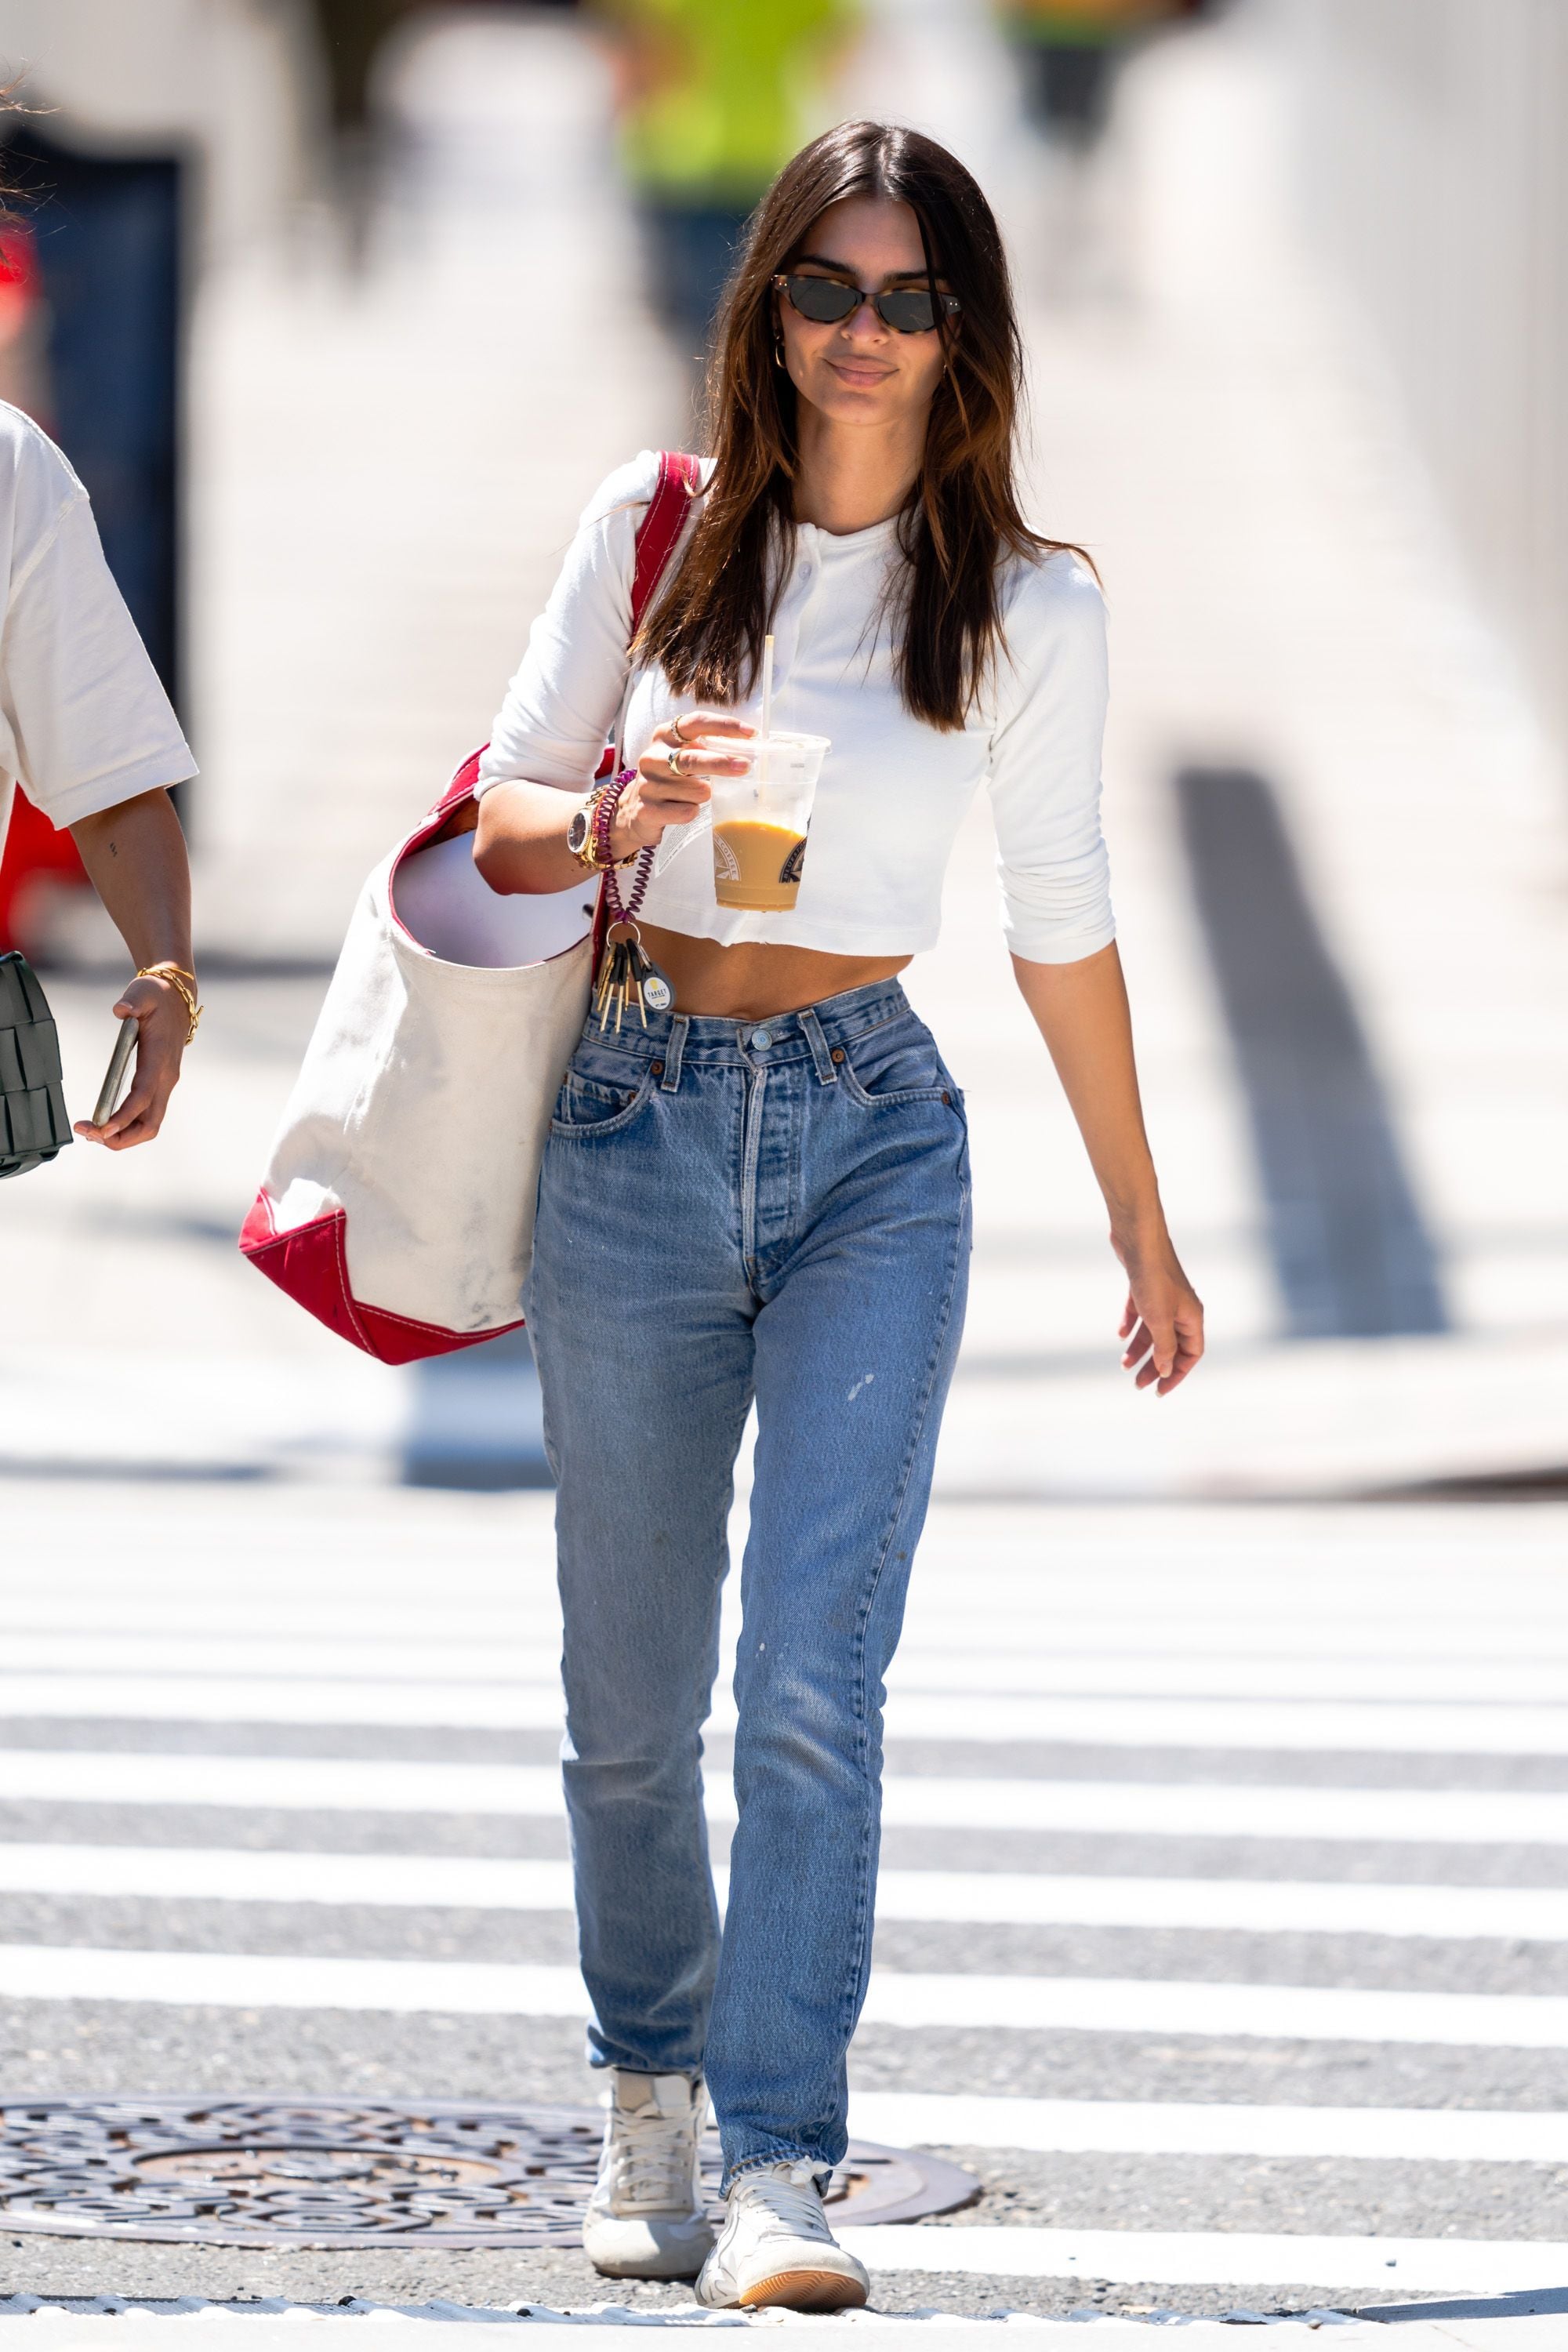 Mom Jeans  The '90s Styling Tip Emily Ratajkowski Borrows From